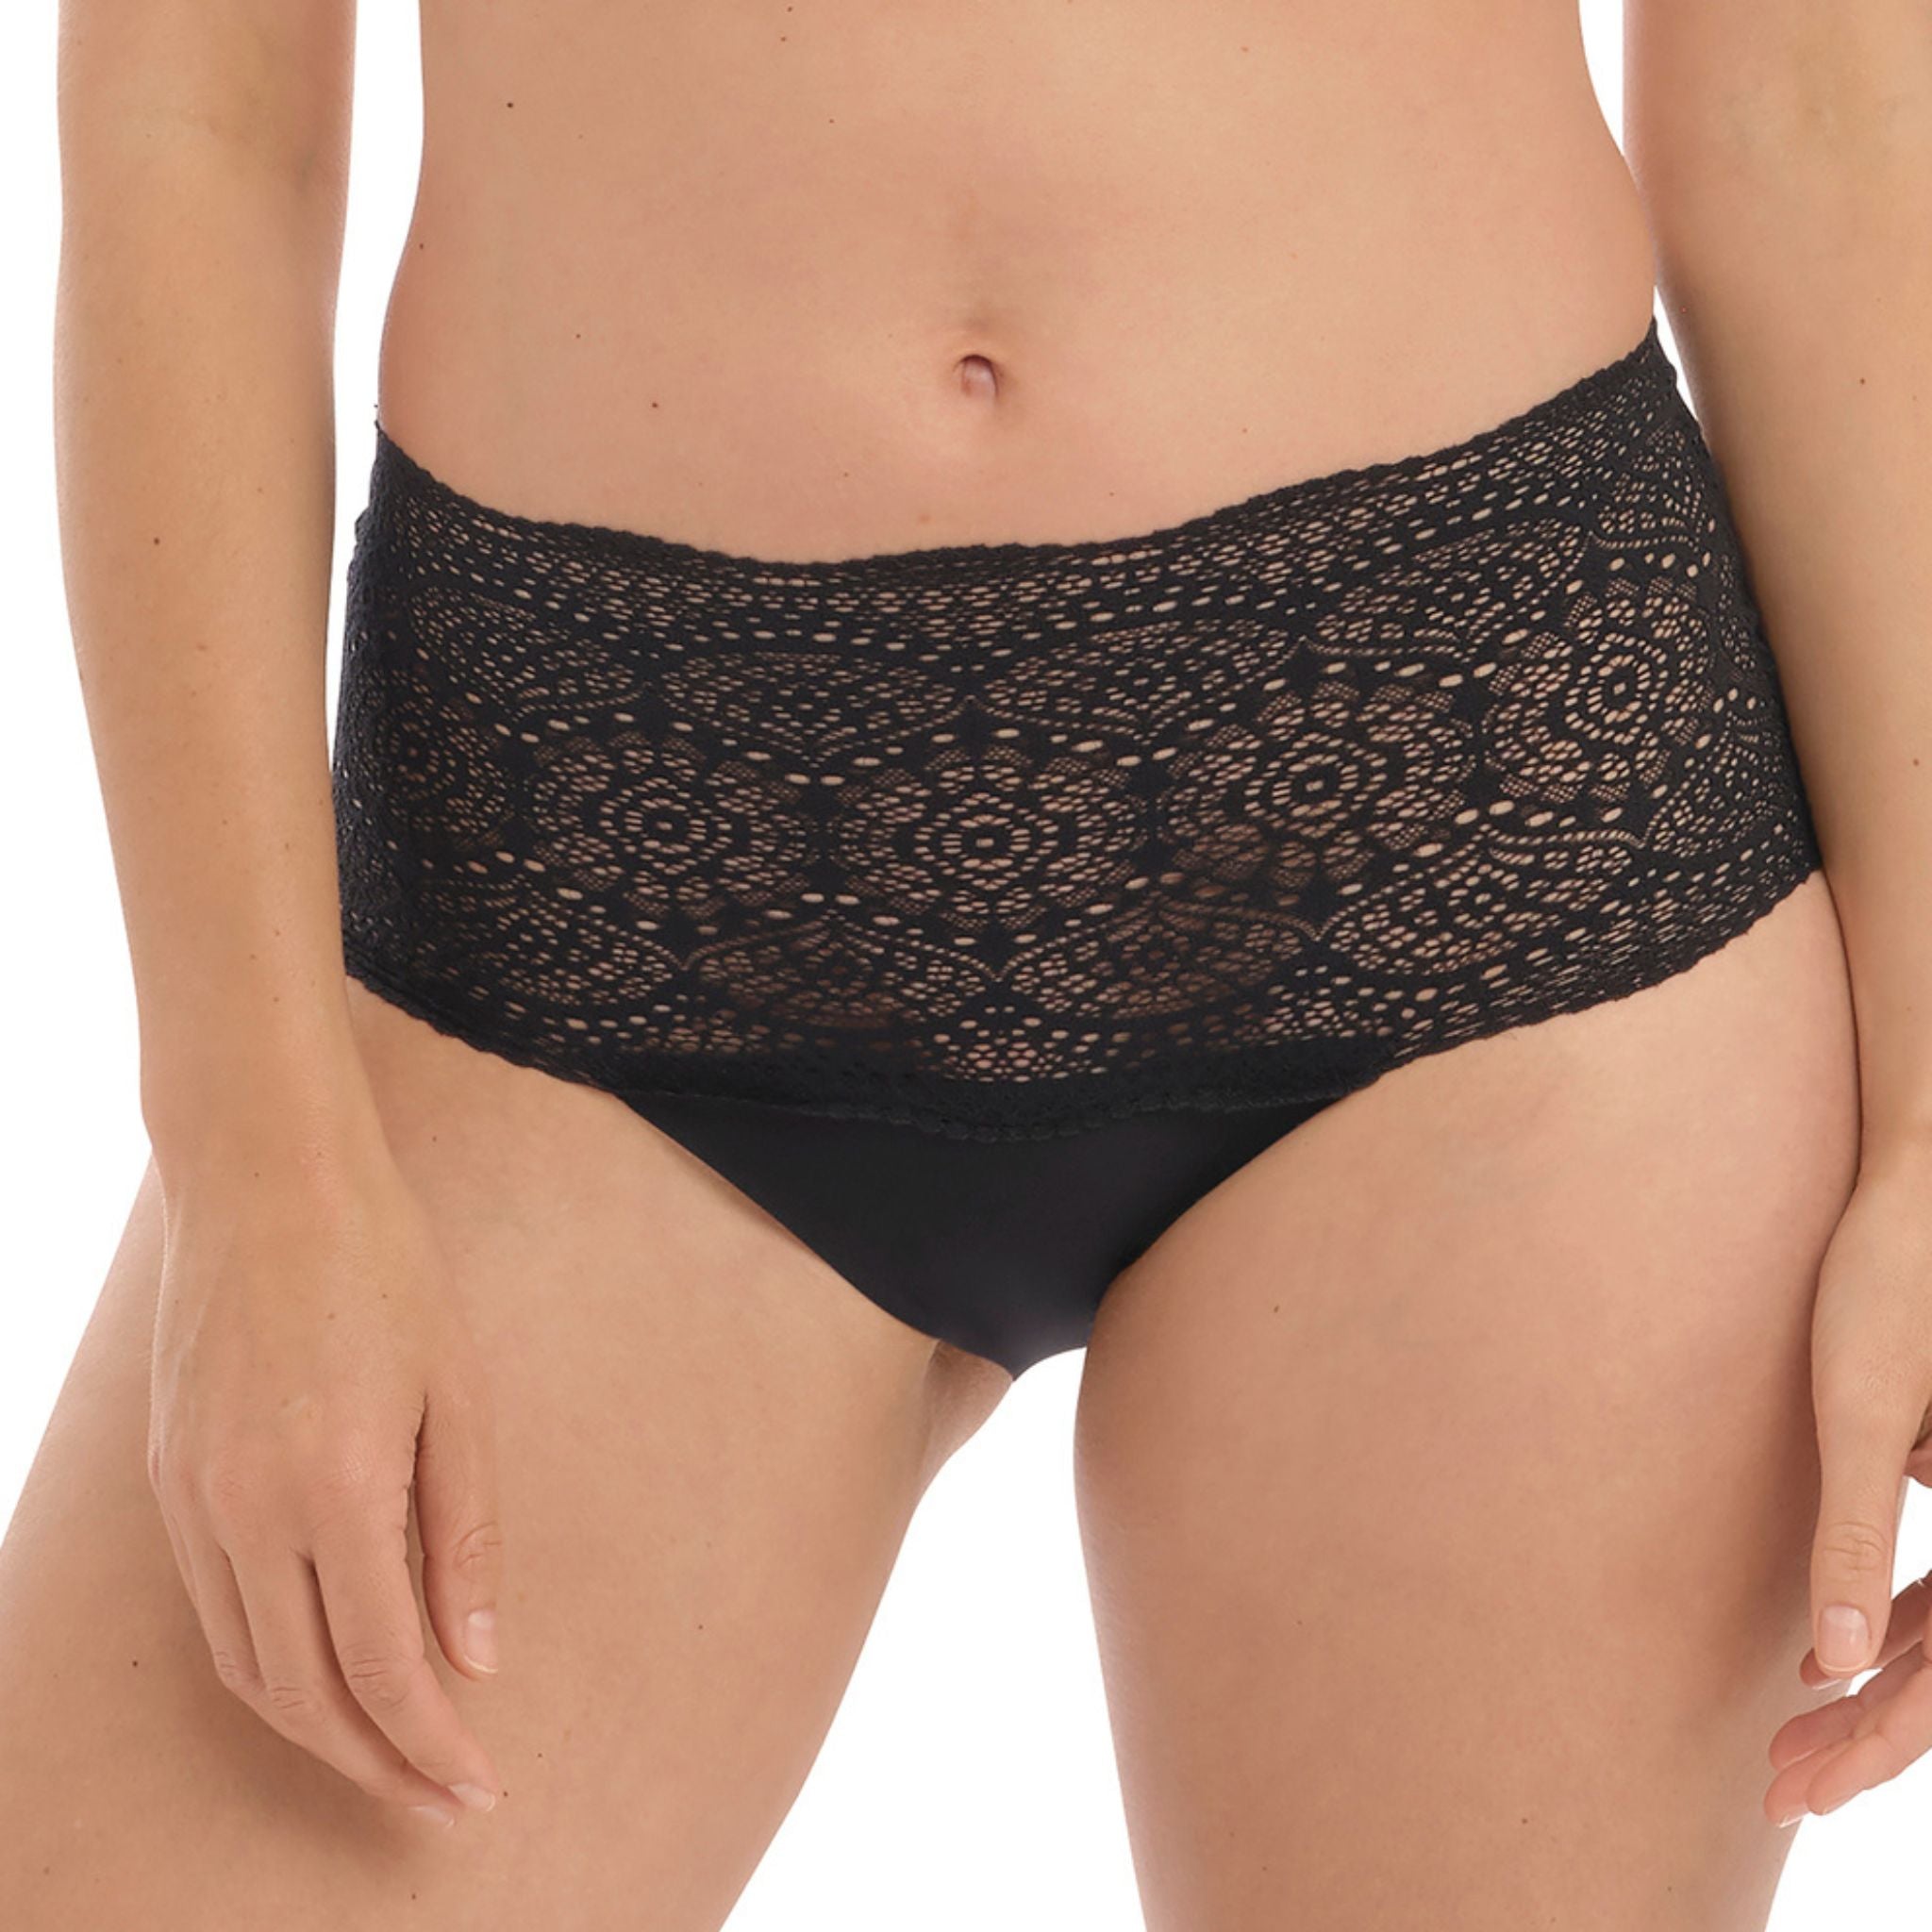 Uncover Lace Ease for an effortlessly sophisticated update to your lingerie basics. The innovative Invisible Stretch Full Brief is crafted to ensure a smooth silhouette under clothes. Soft handle fabric creates a second skin feel, with super stretch Art Deco lace for a luxurious touch.  Fuller coverage brief  Soft handle fabric for a smooth second skin feel  Super stretch flat lace with bonded seams and gusset for a no VPL finish  One size fits XS - XL